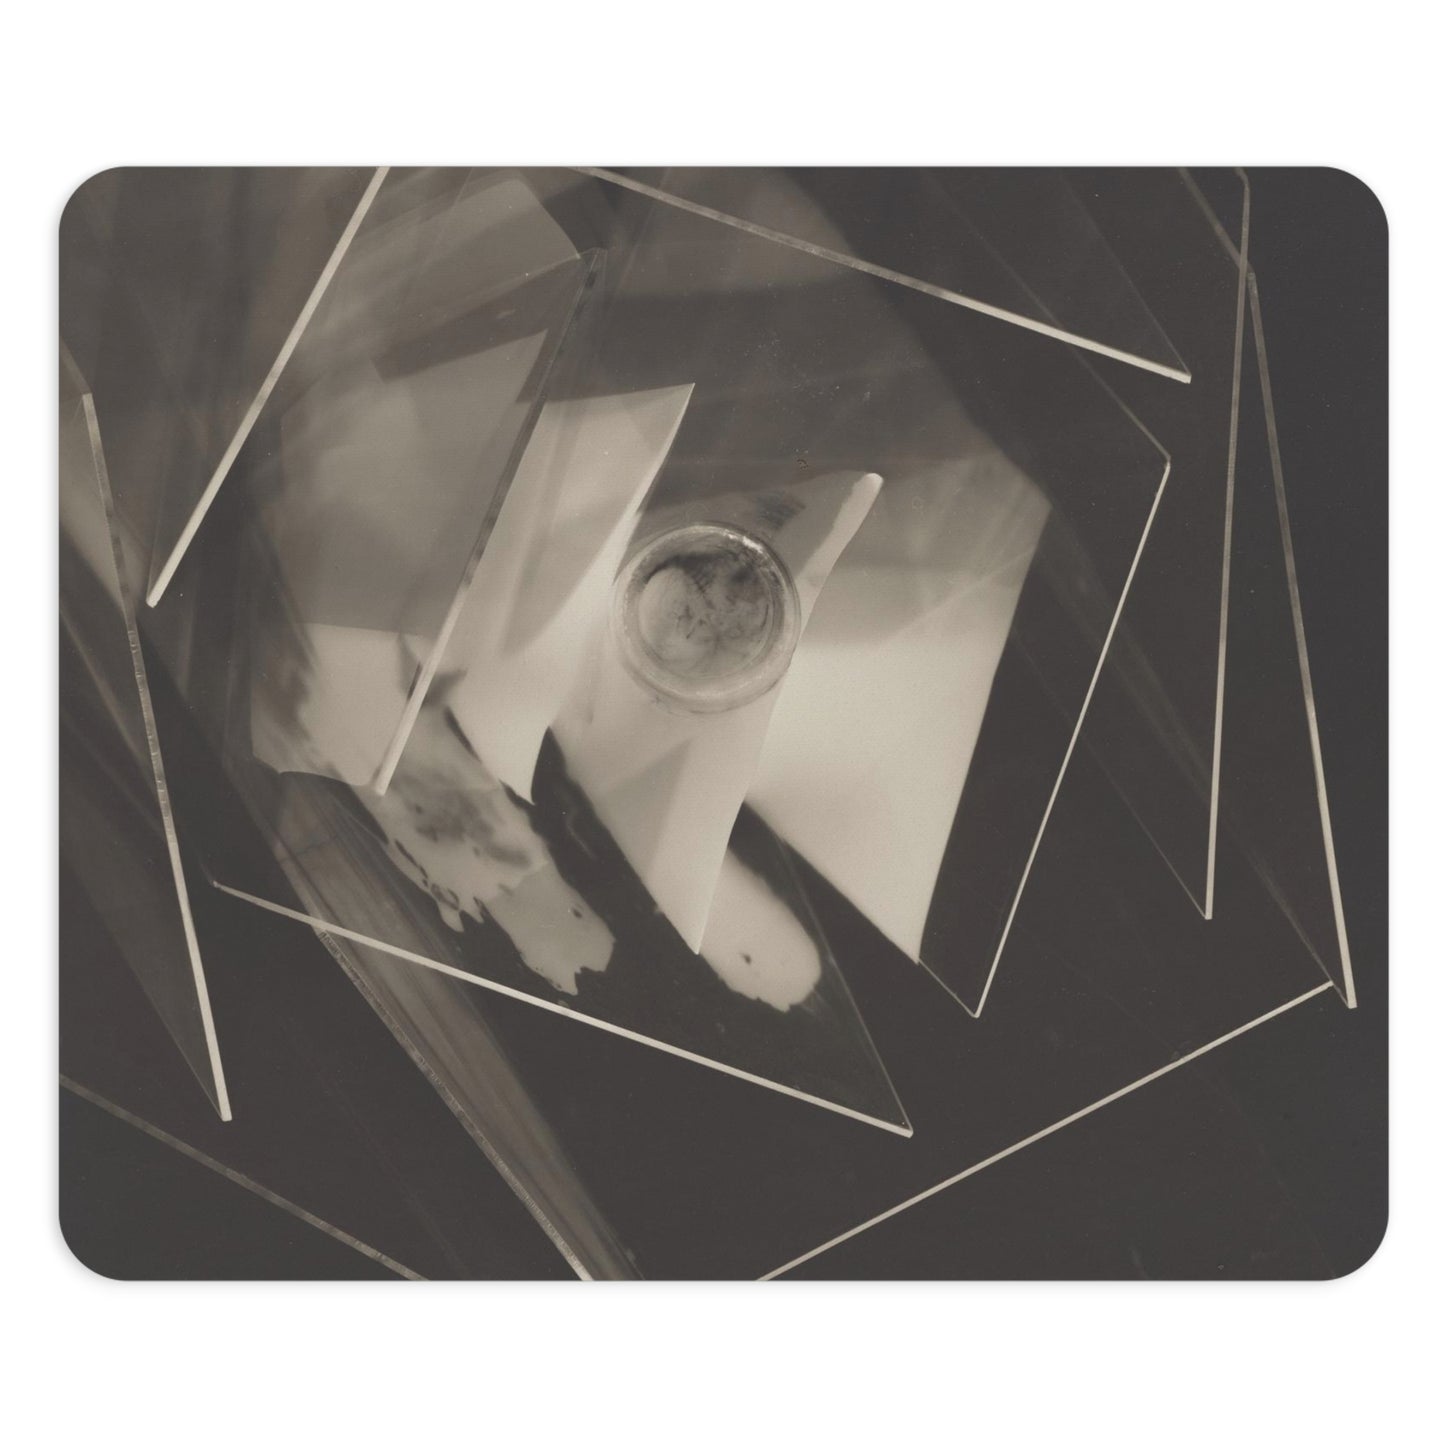 MAN RAY - AIRPLANES - ART MOUSE PAD